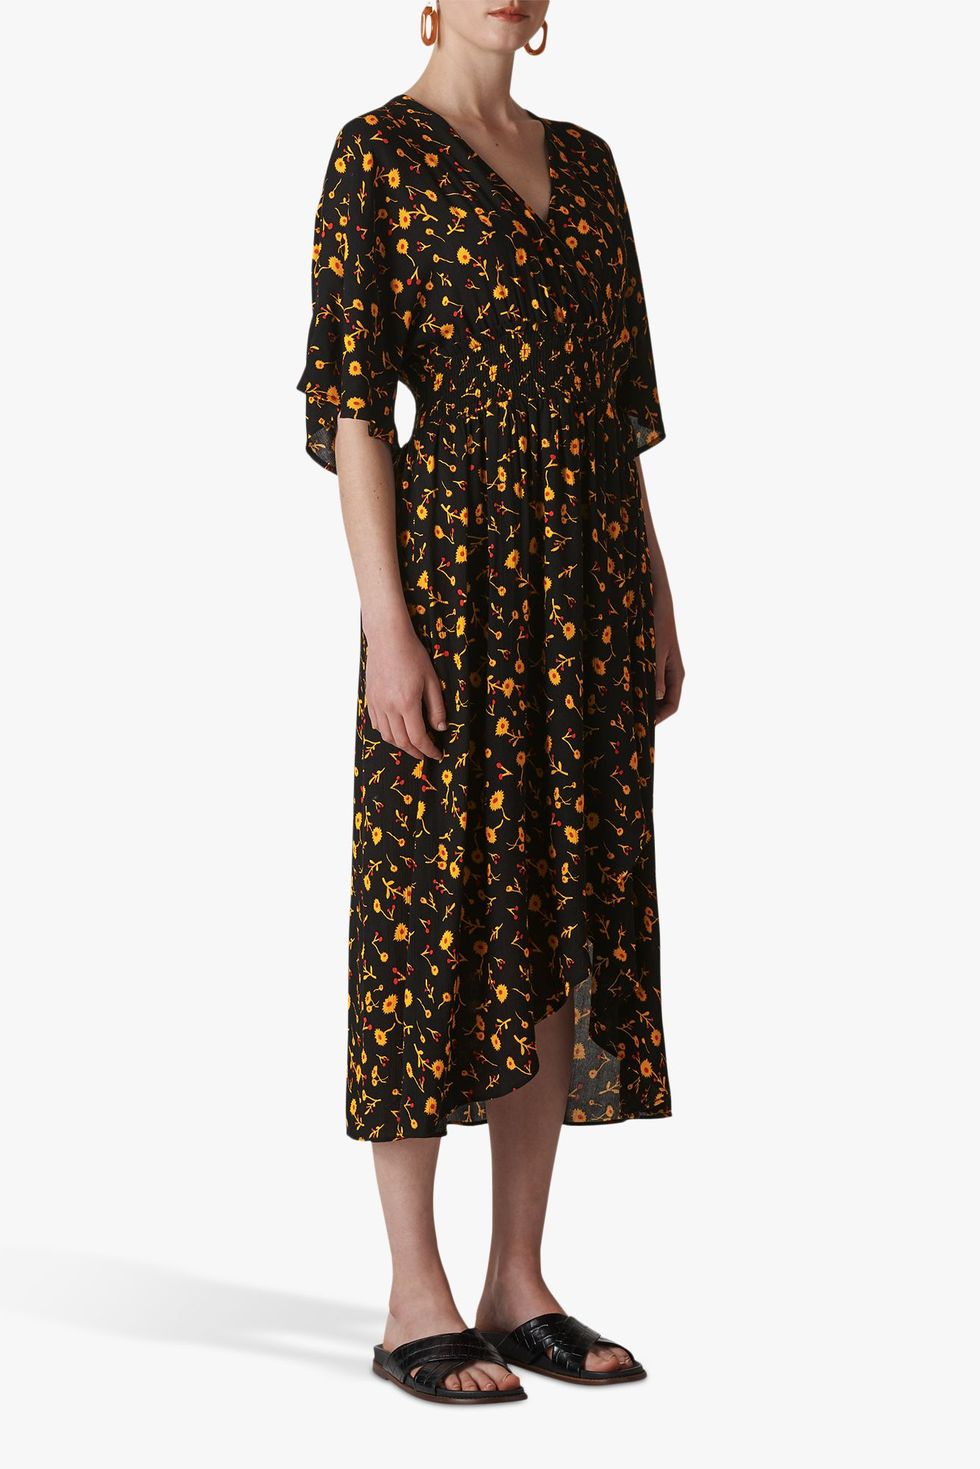 Whistles Aster Floral Wrap Dress